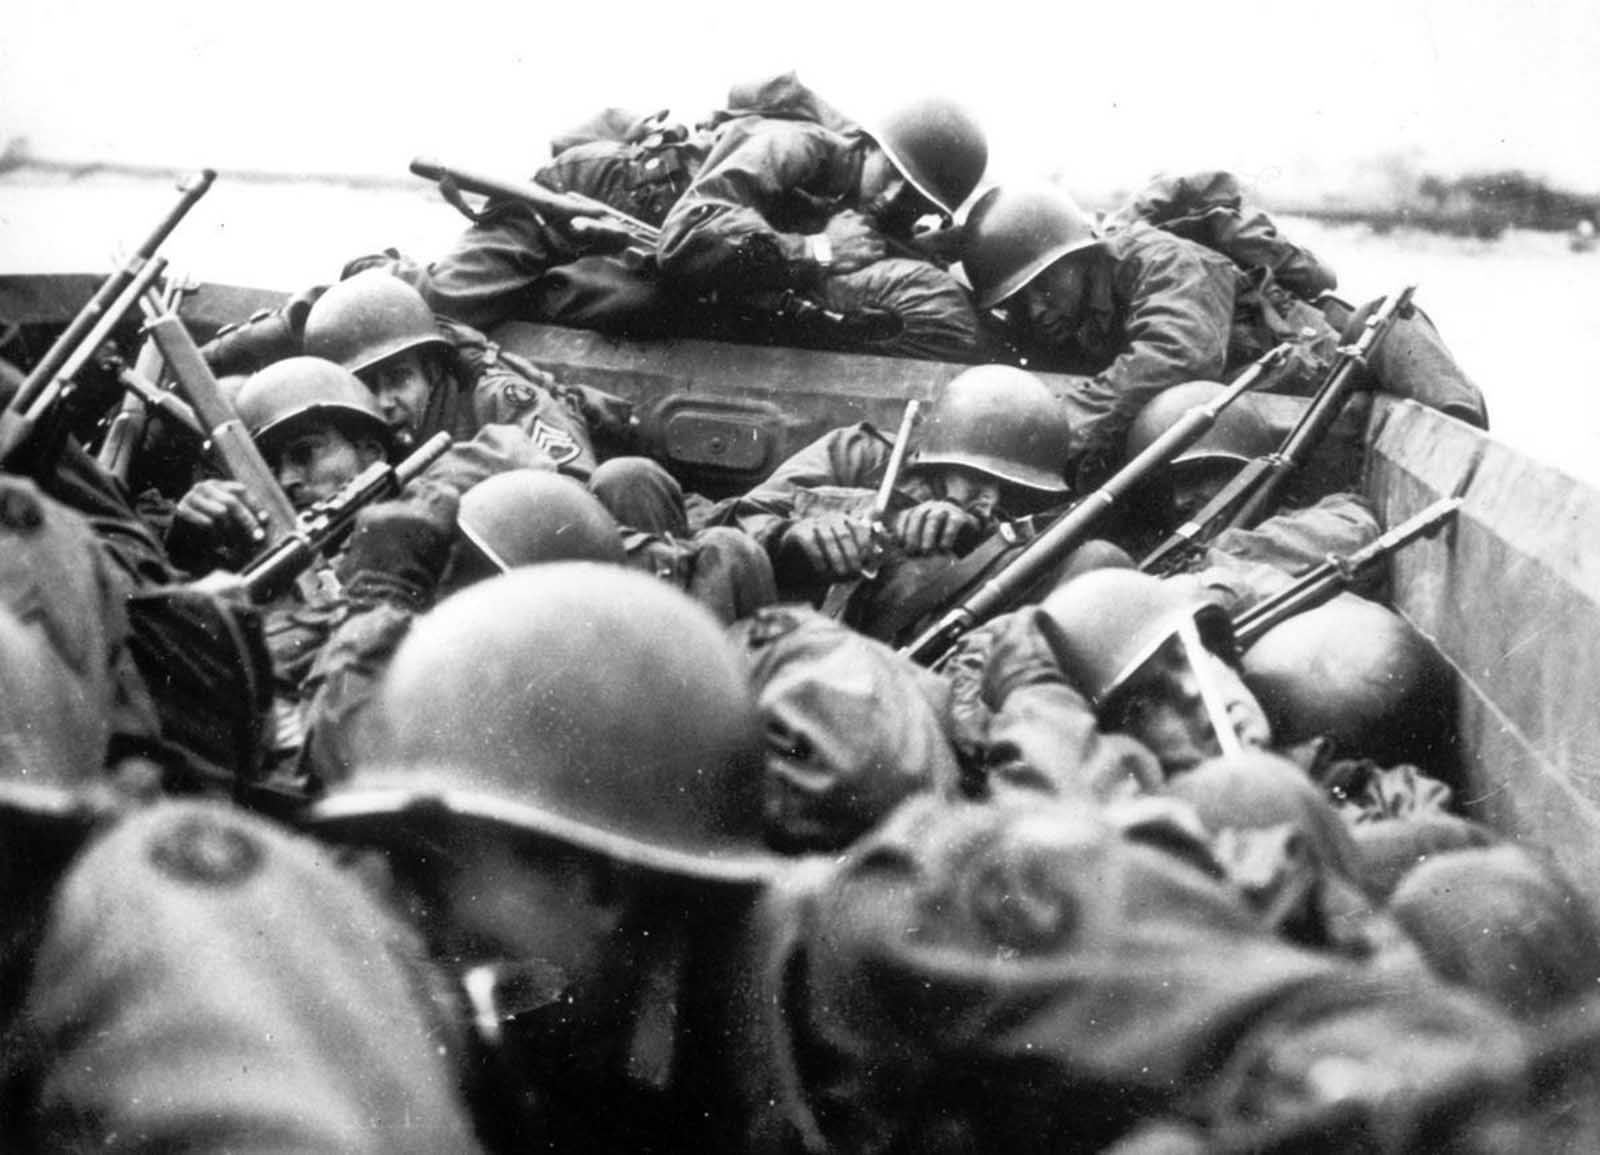 American soldiers aboard an assault boat huddle together as they cross the Rhine river at St. Goar, Germany, while under heavy fire from the German forces, in March of 1945. 